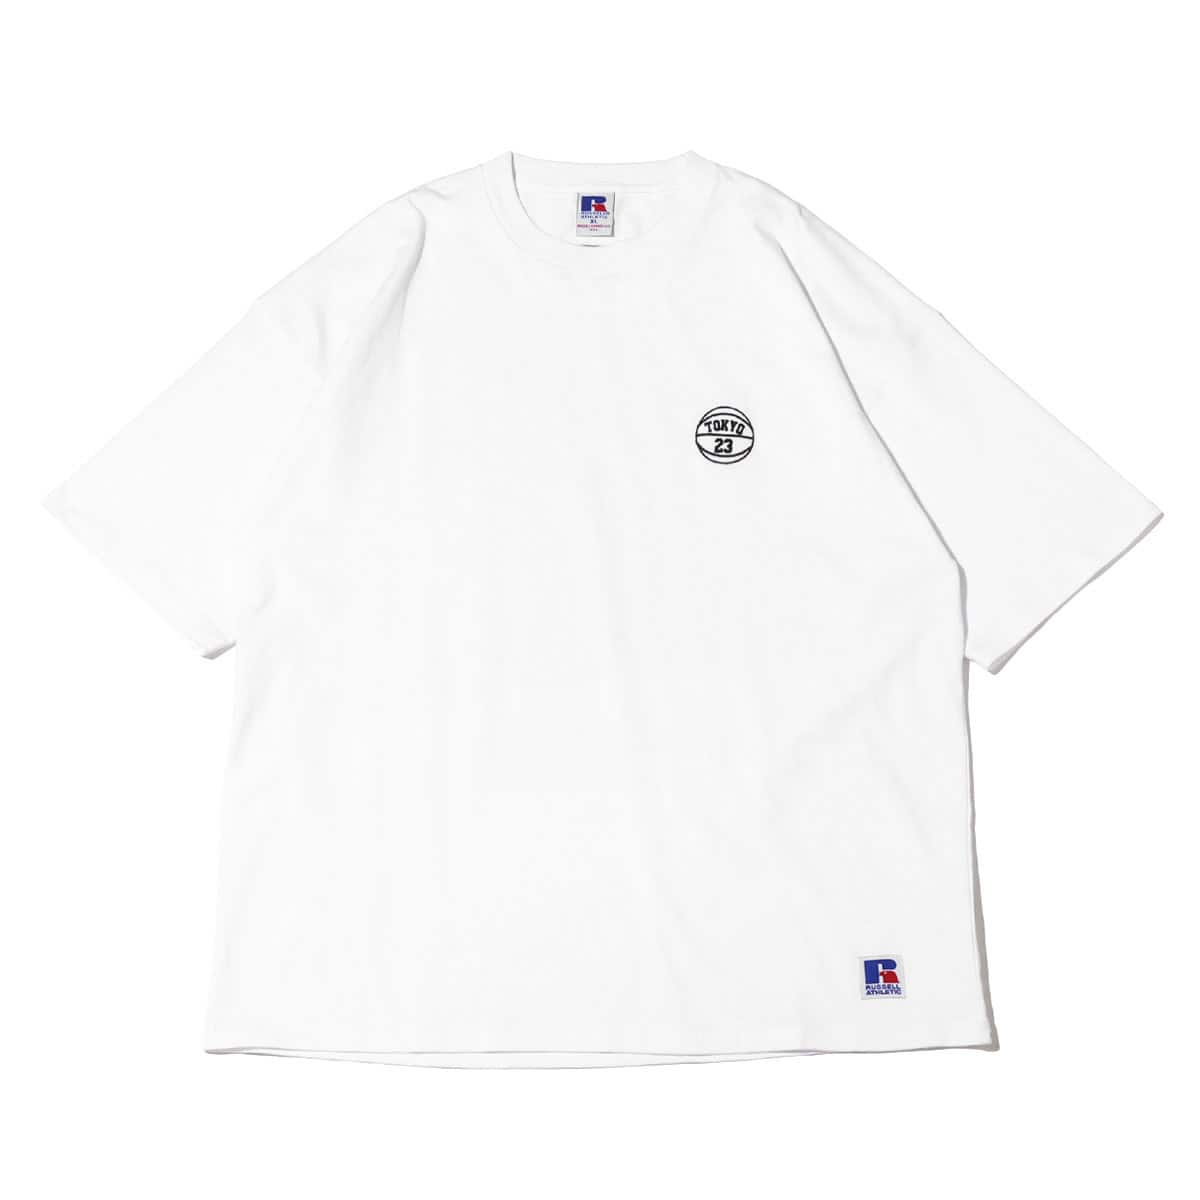 TOKYO 23 x RUSSELL ATHLETIC EMBROIDERY LOGO TEE WHITE 22SS-S_photo_large